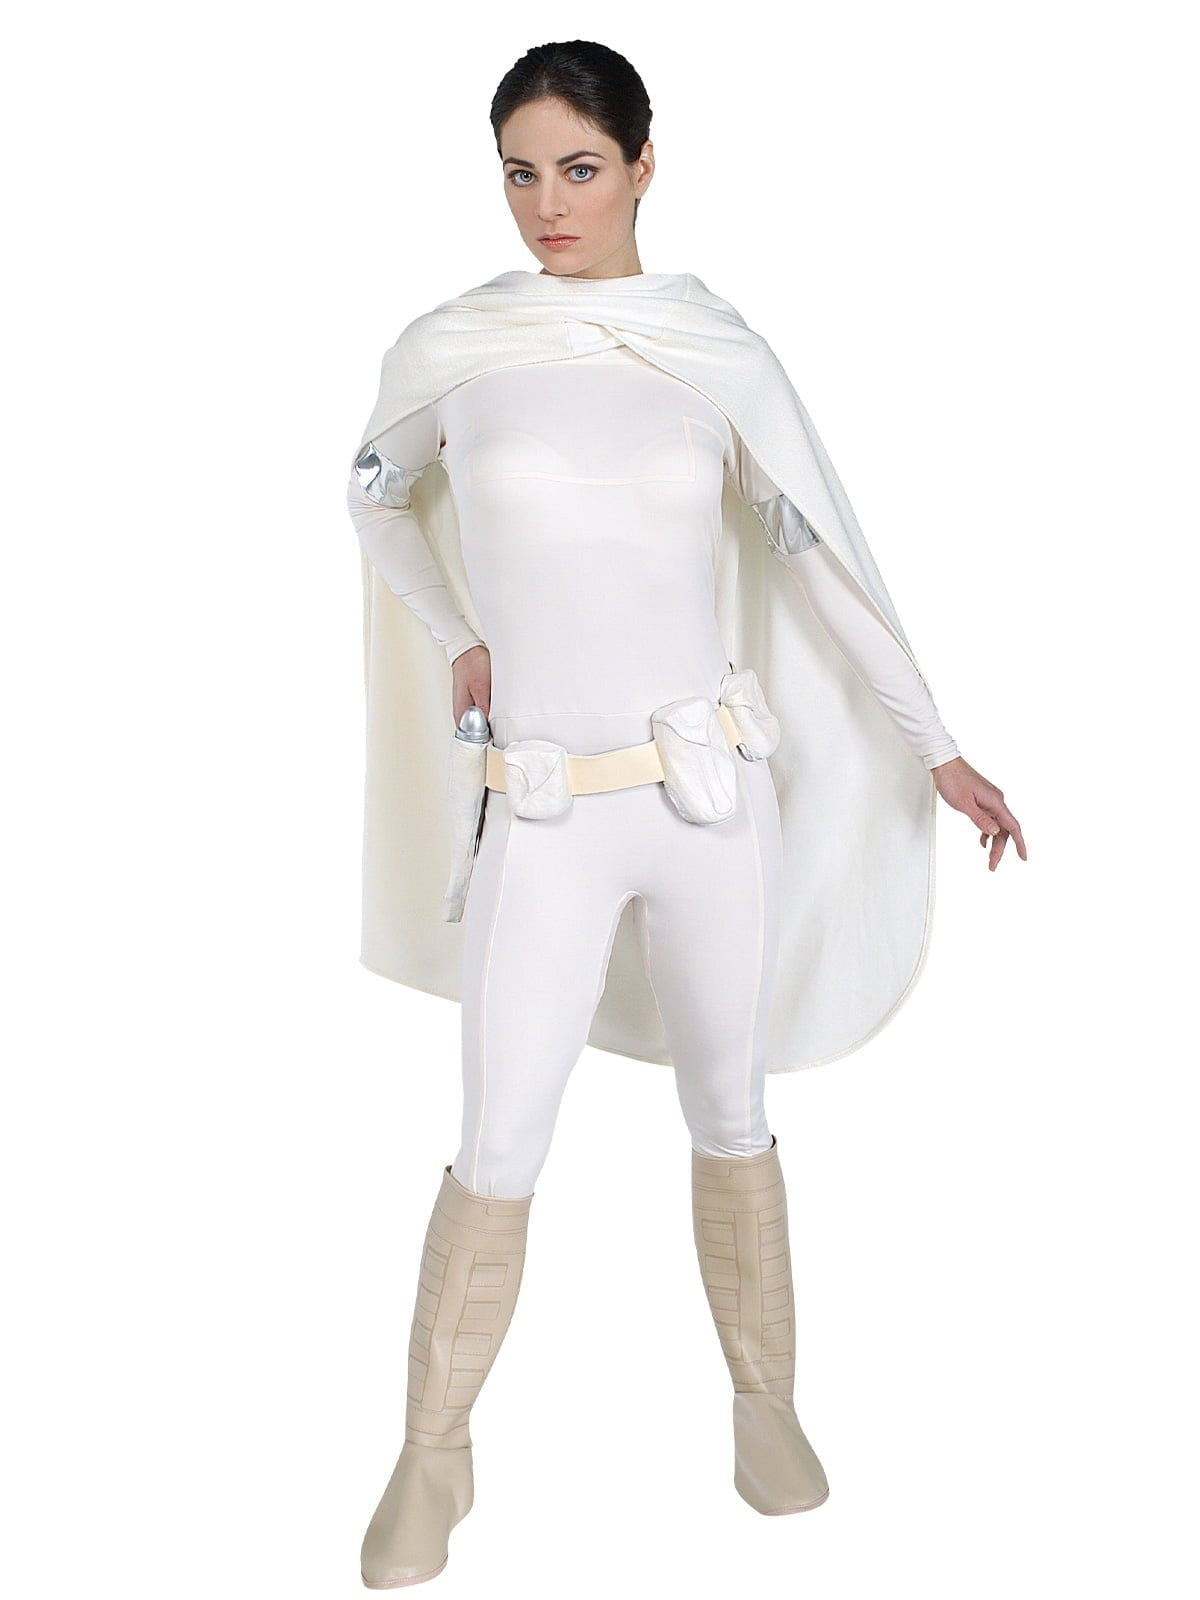 Featured image for “Padme Amidala Deluxe Costume, Adult”